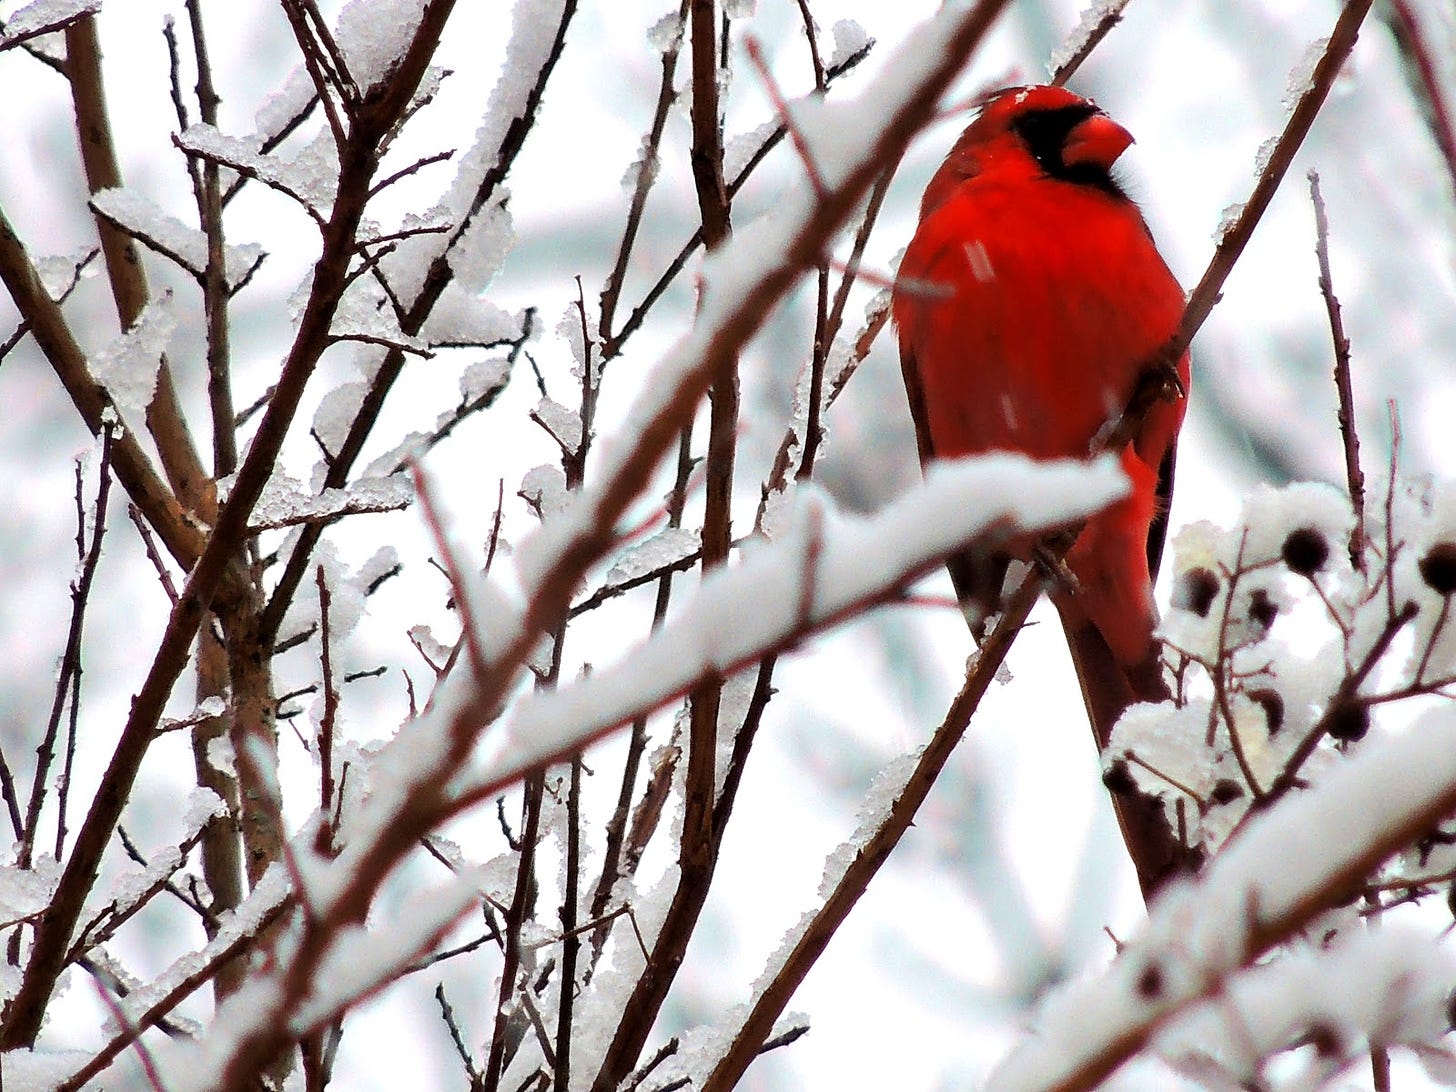 red cardinal sitting in snowy tree branches